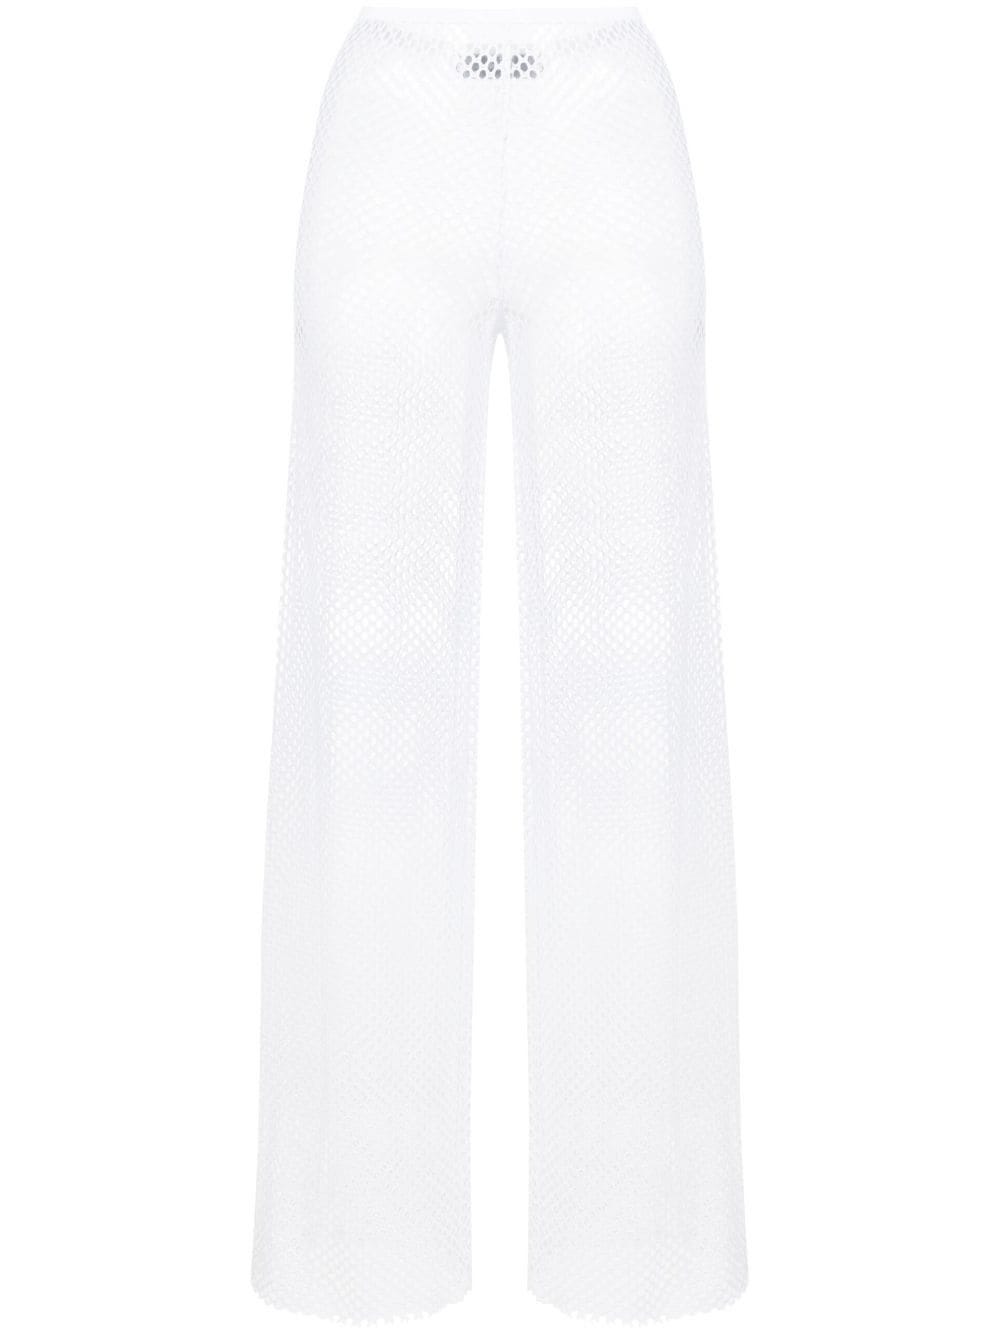 FEDERICA TOSI WHITE PERFORATED HIGH-WAISTED TROUSERS